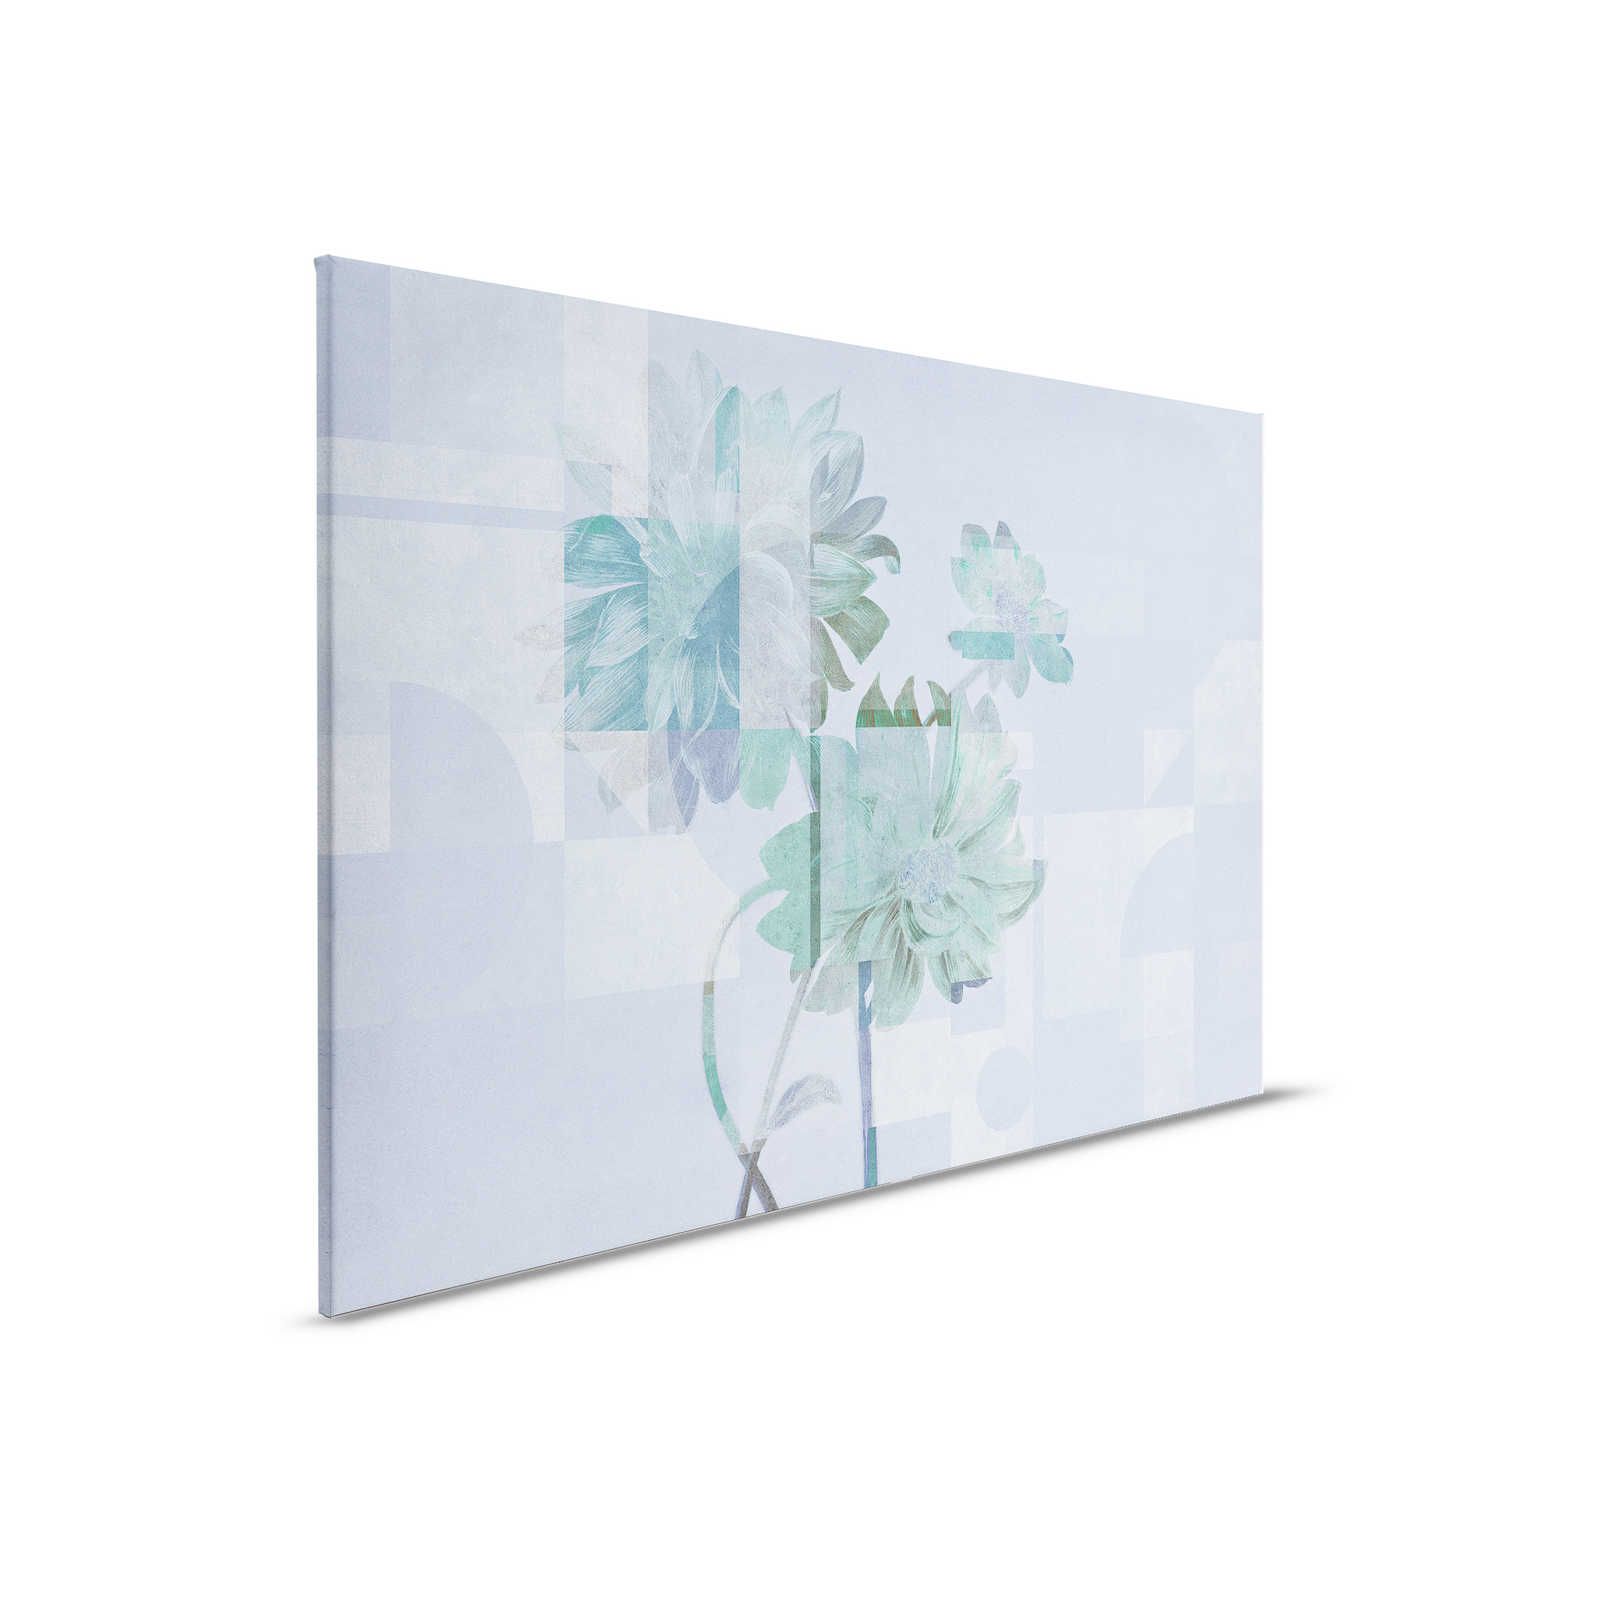 Queens Garden 1 - Flowers Canvas painting blue daisies & graphic pattern - 0.90 m x 0.60 m
